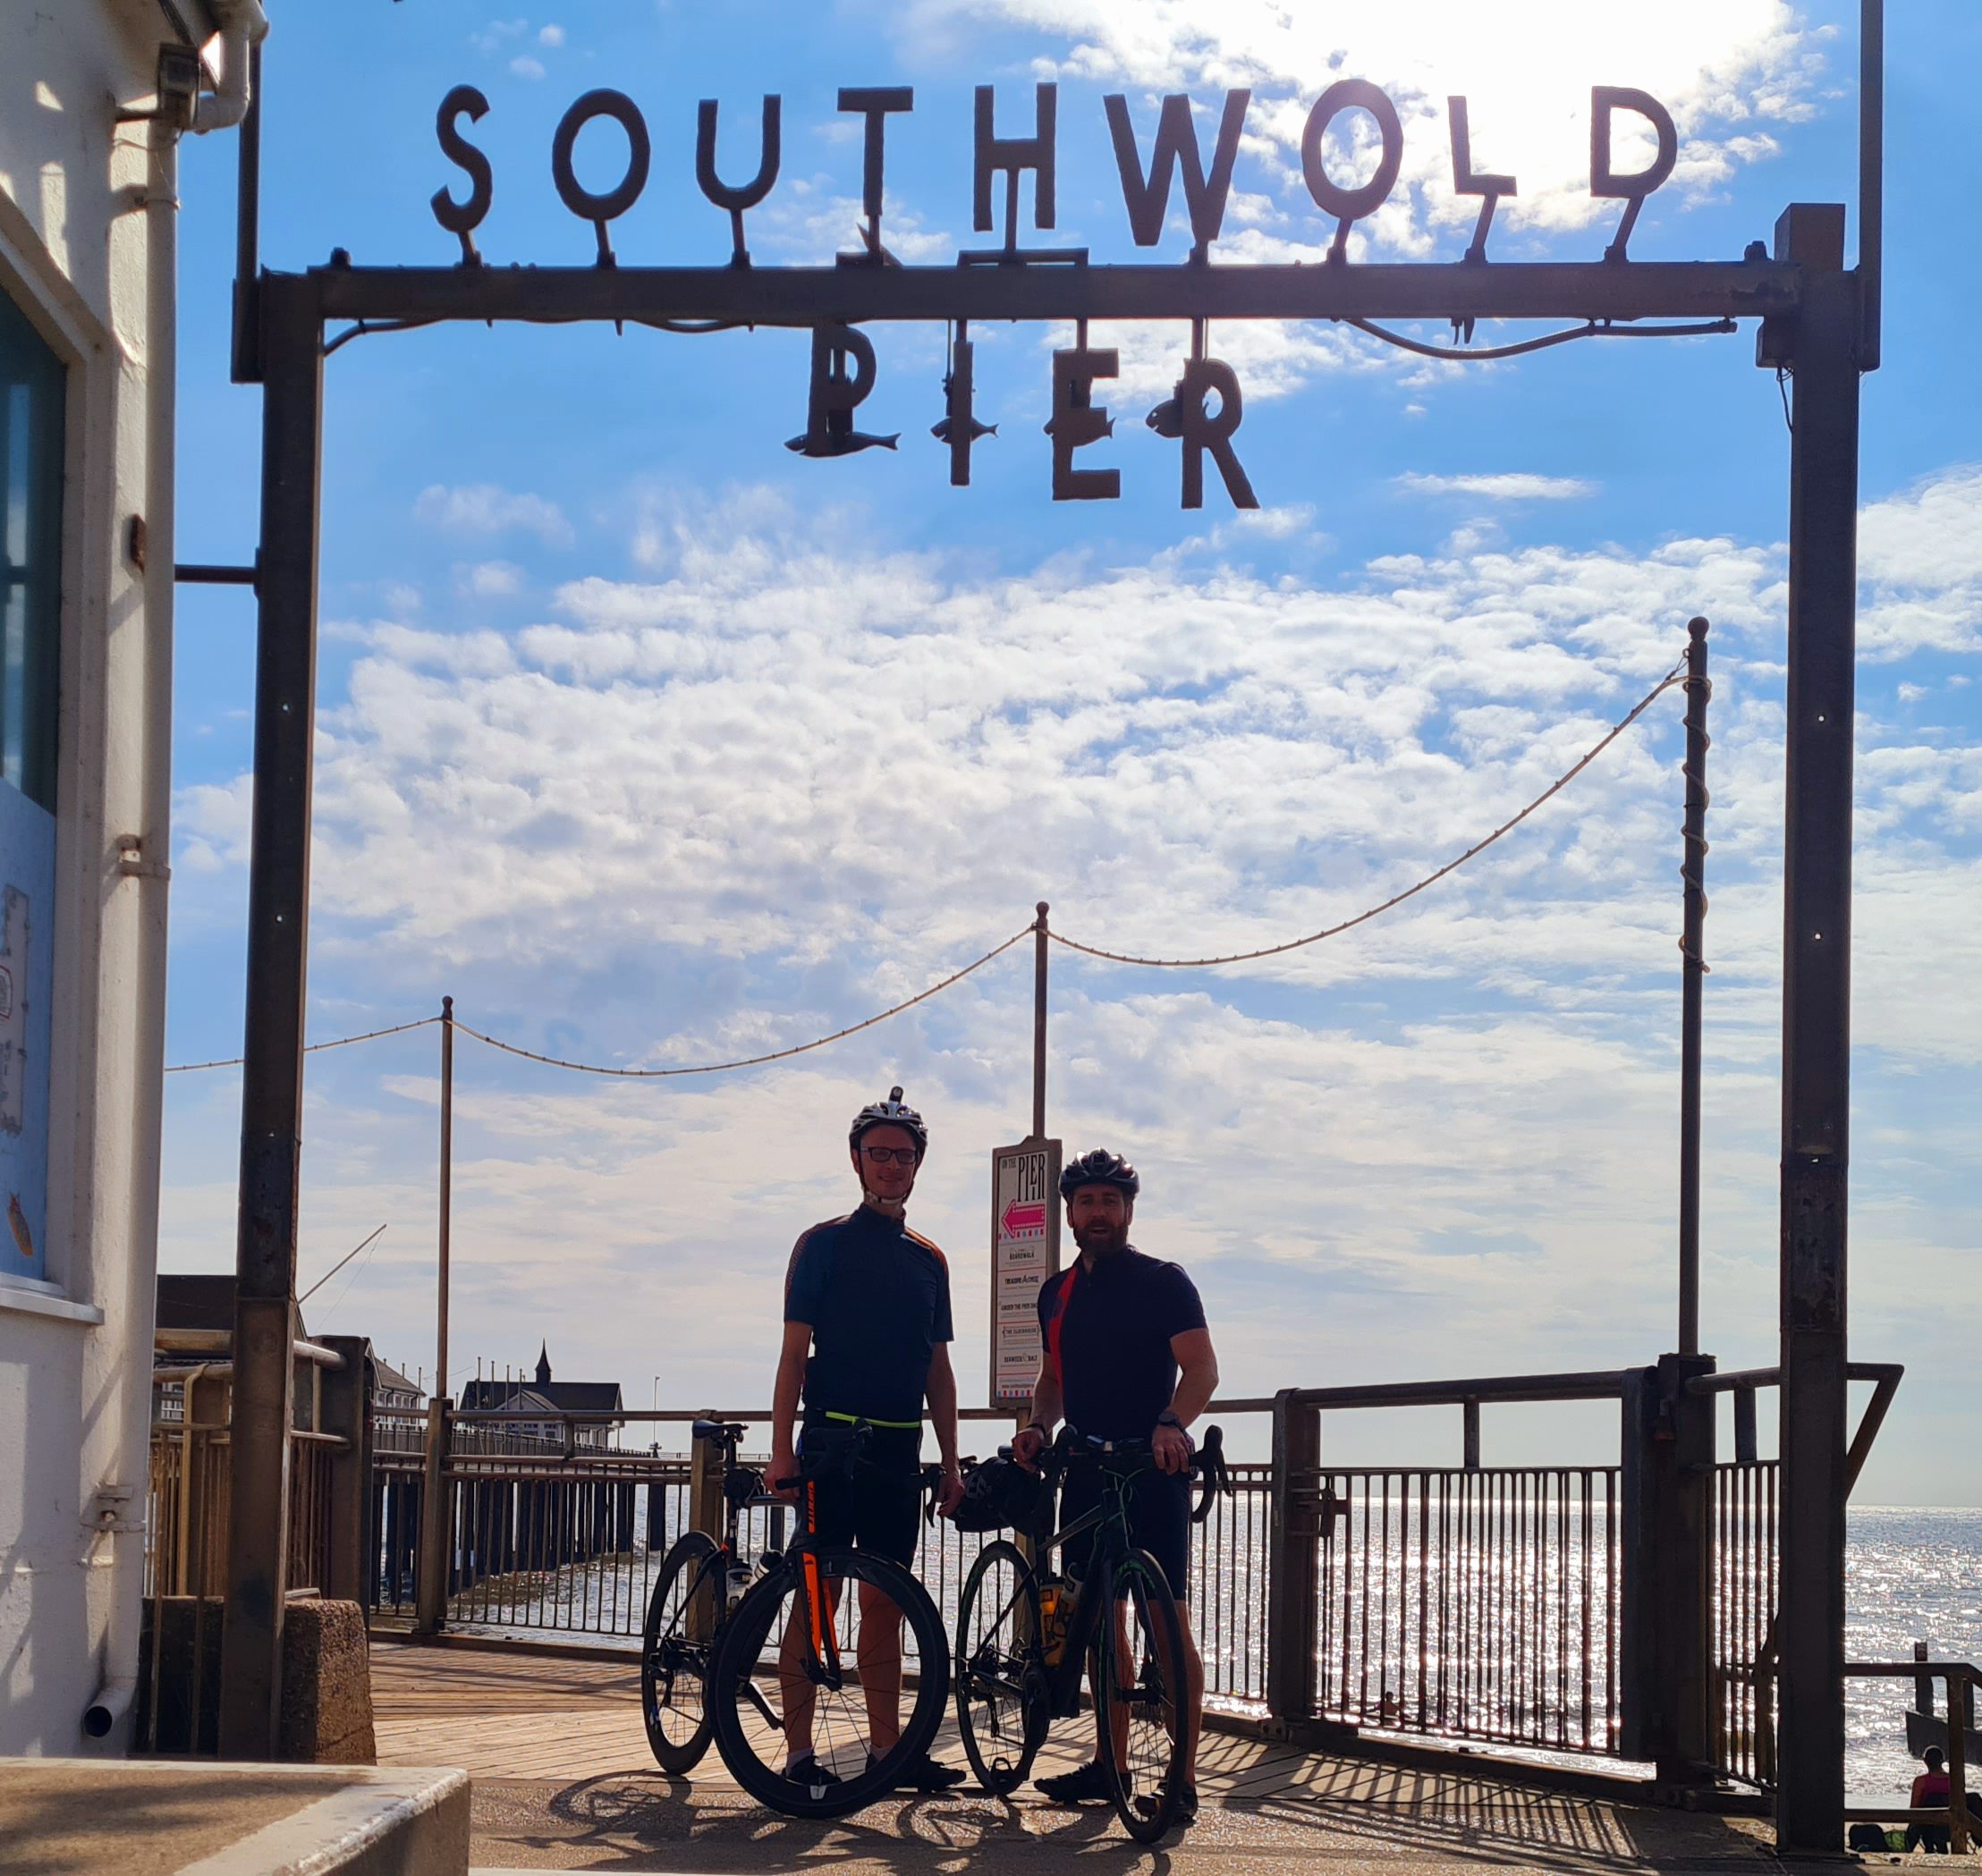 Two people on bicycles in front of Southwold Pier with sunshine and clouds behind them